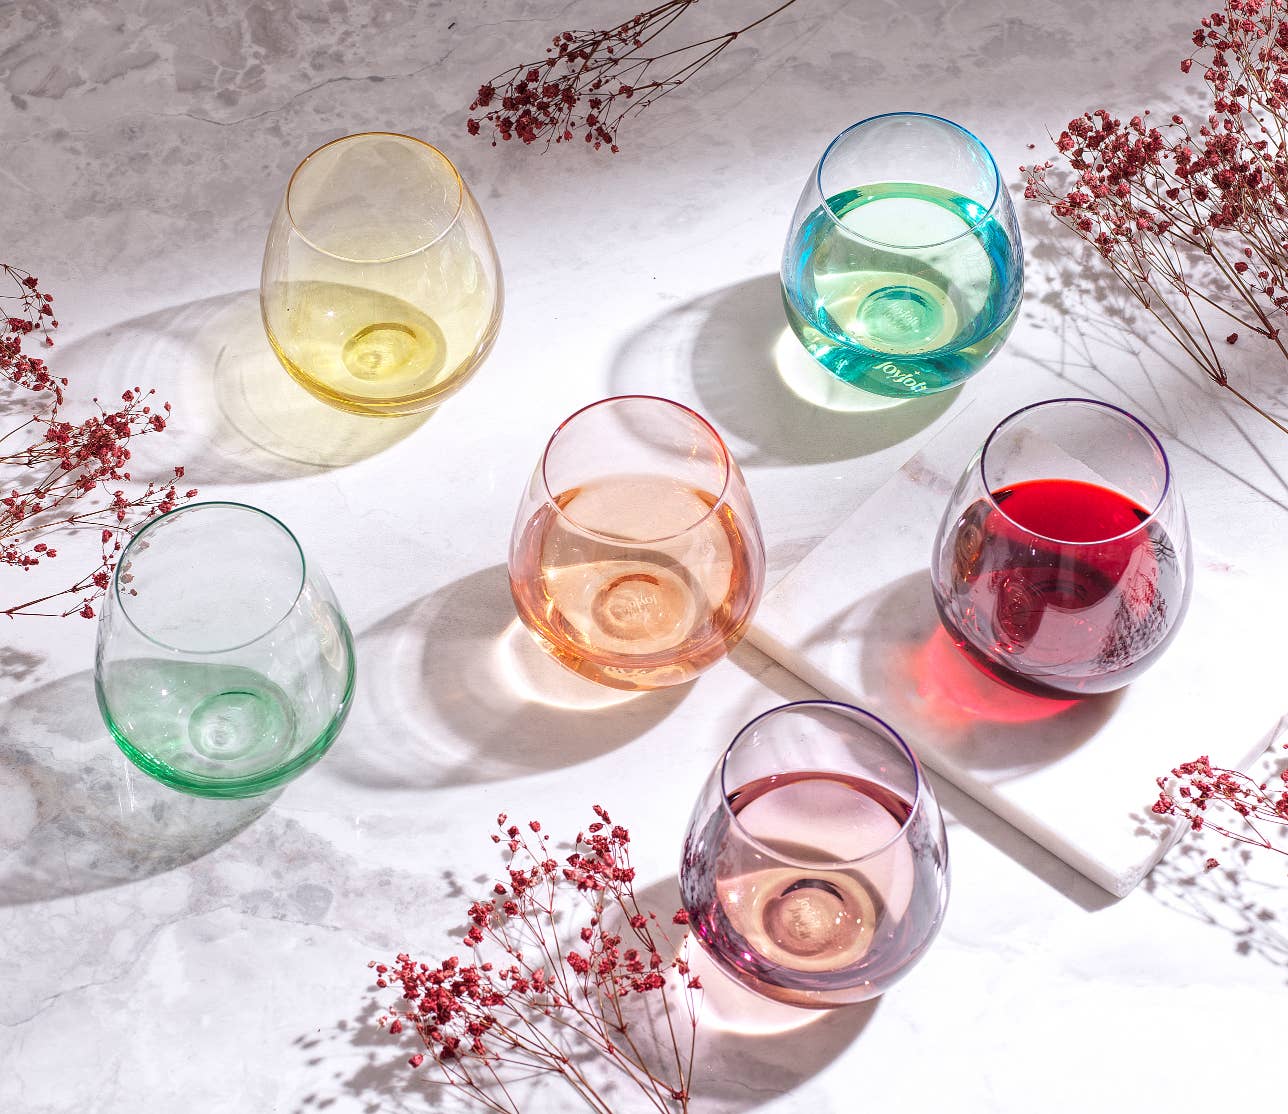 JoyJolt - Hue Colored Stemless Wine Glasses, Colorful Party Glasses